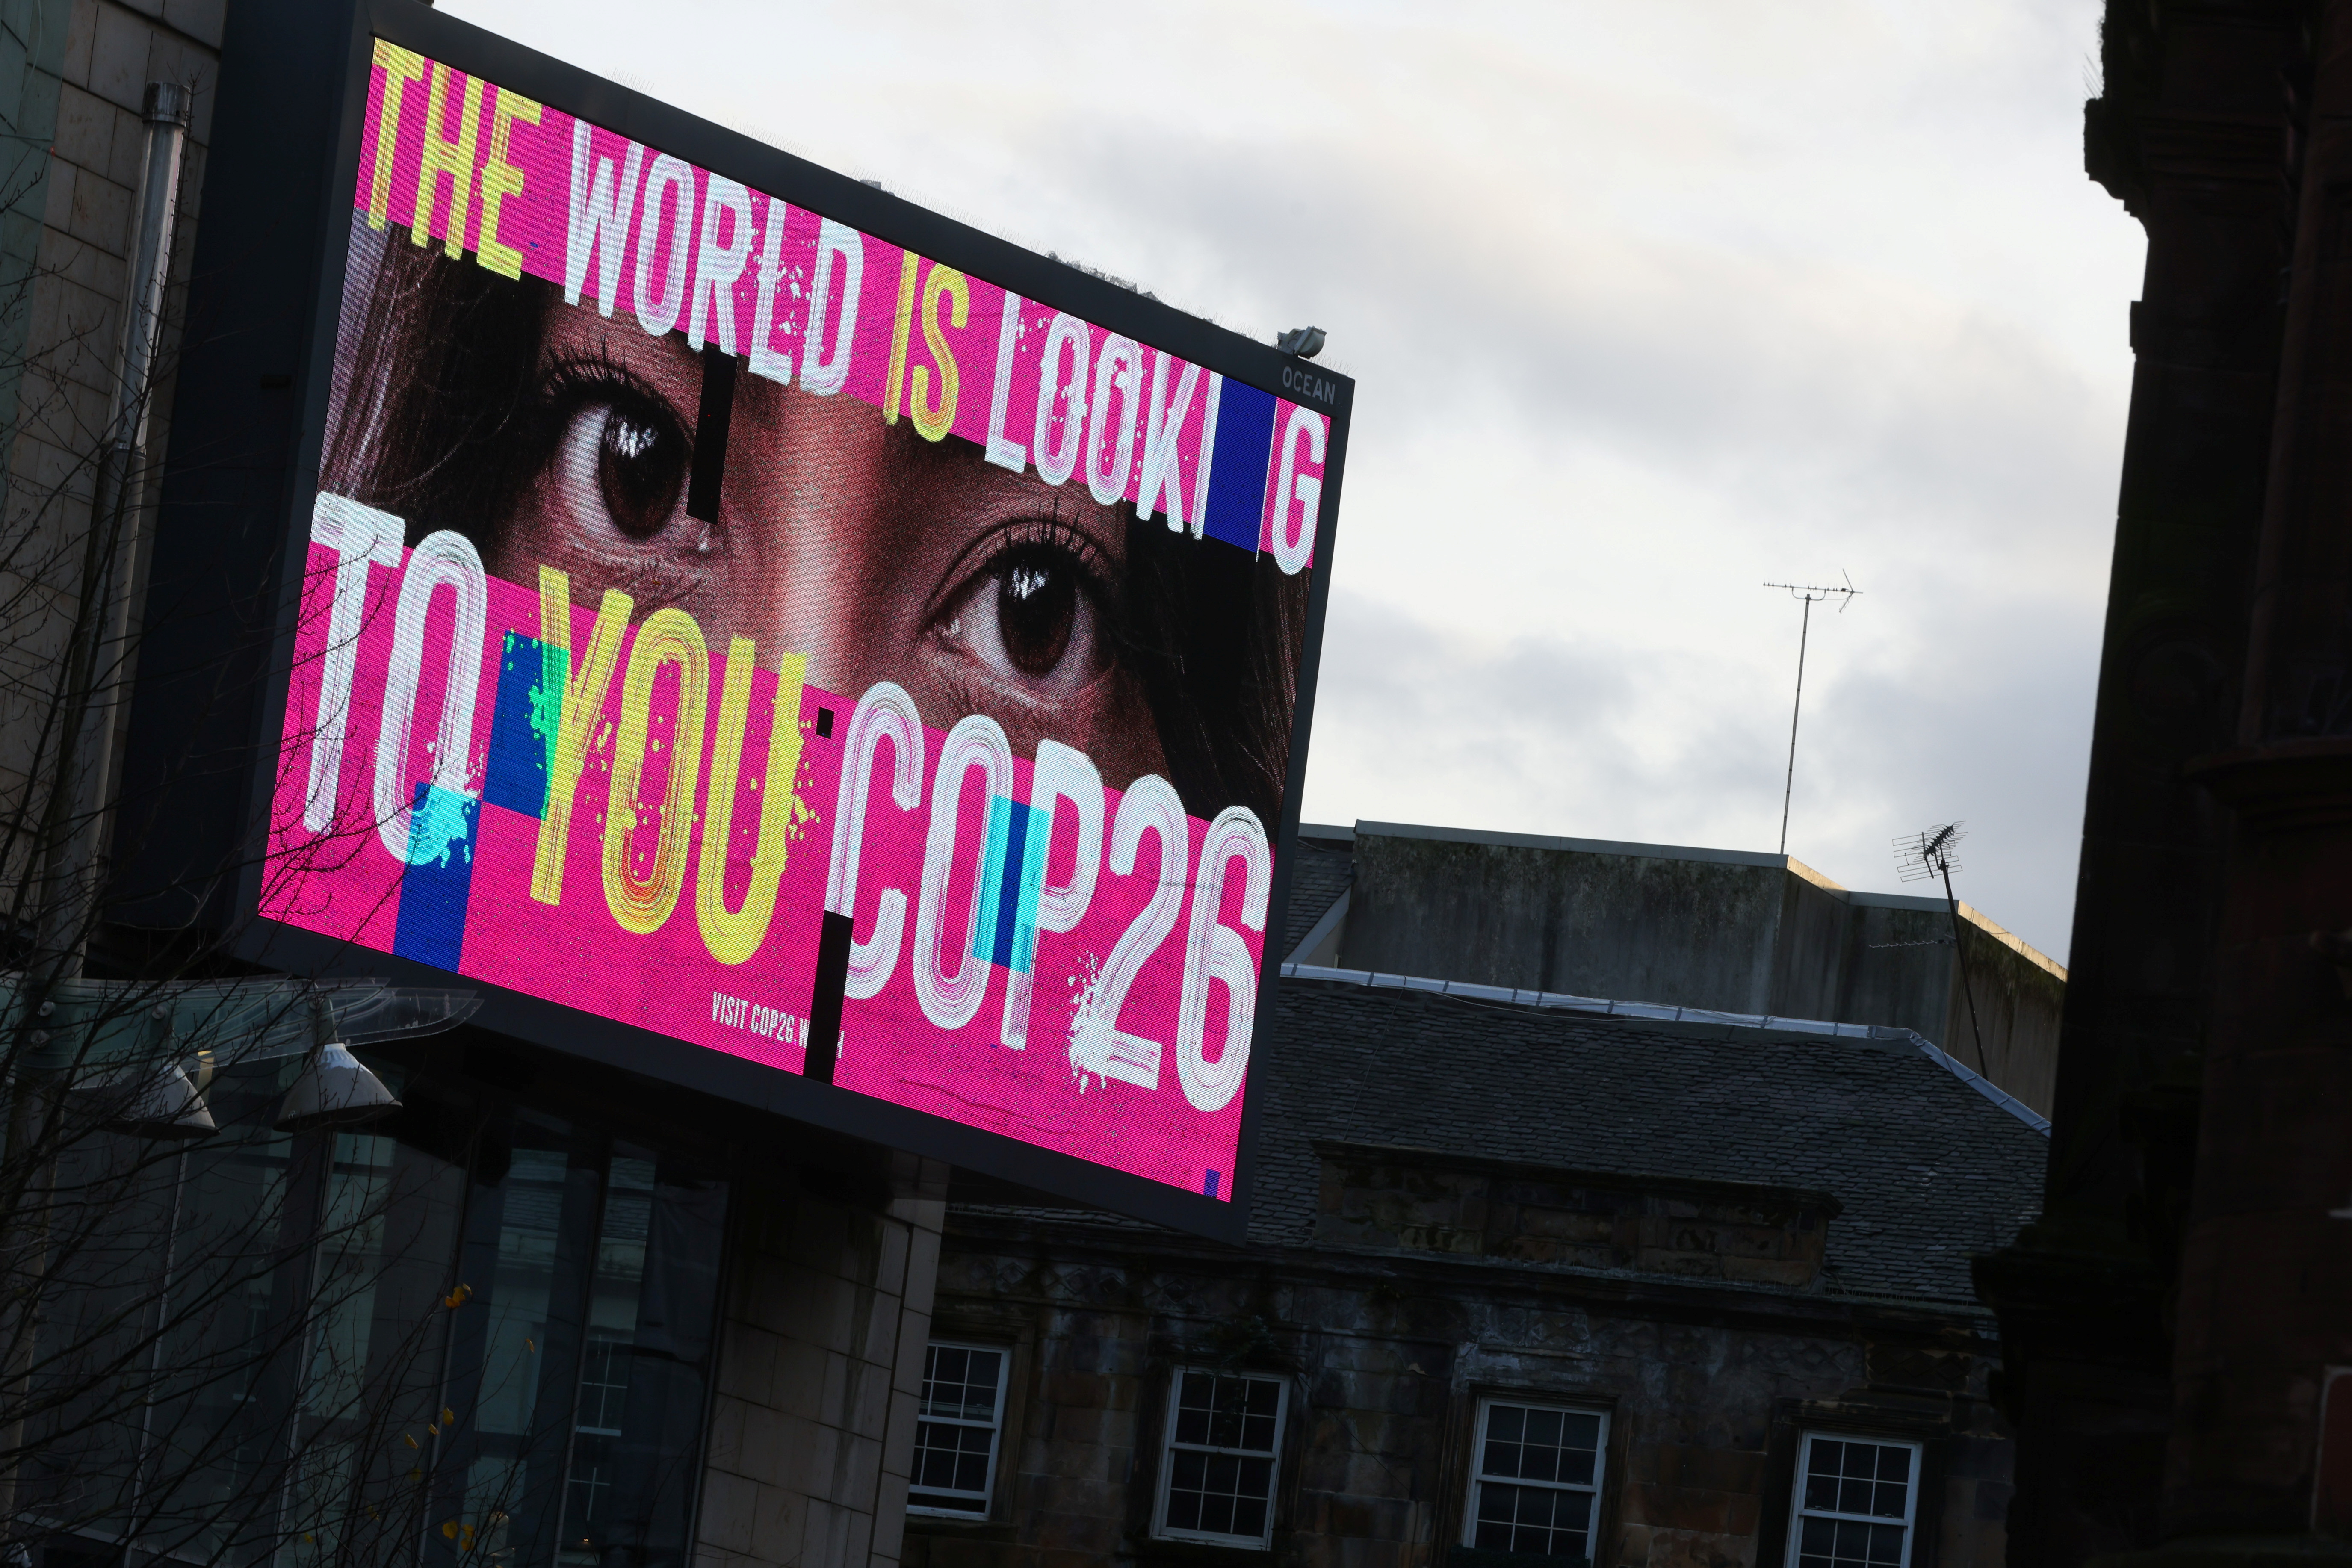 An advertising board is seen during the UN Climate Change Conference (COP26), in Glasgow, Scotland, Britain, November 7, 2021. REUTERS/Yves Herman